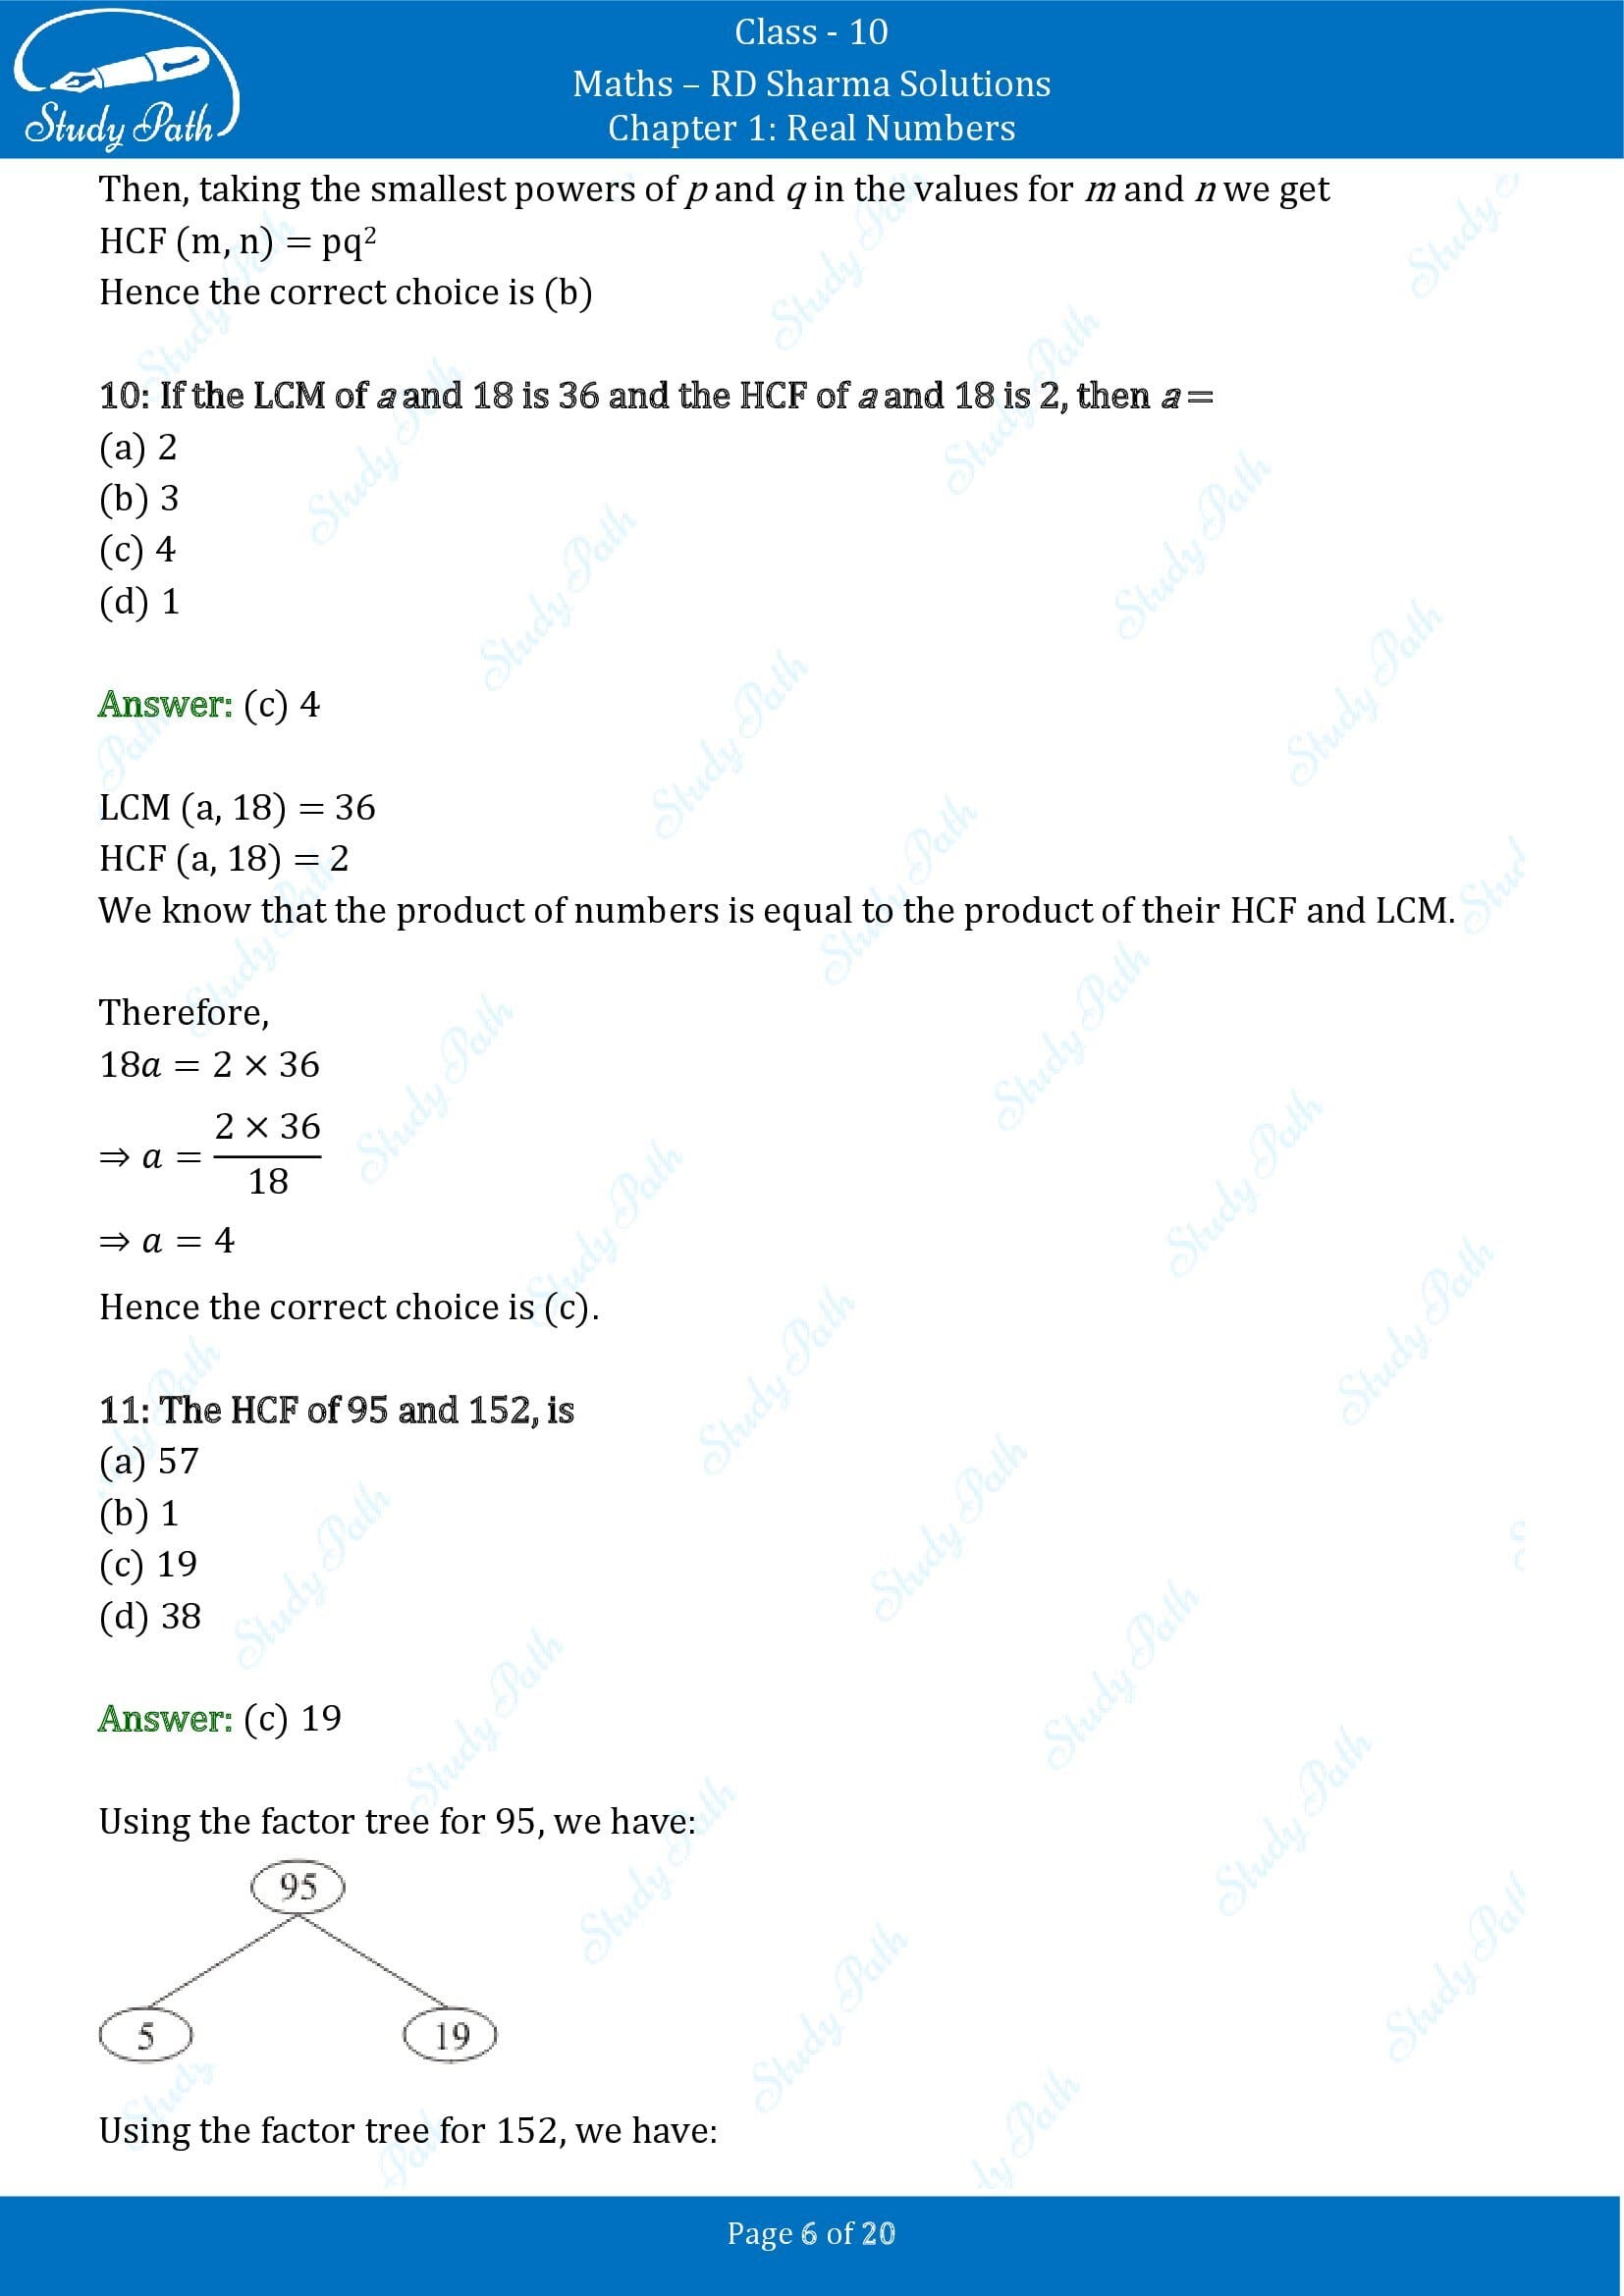 RD Sharma Solutions Class 10 Chapter 1 Real Numbers Multiple Choice Questions MCQs 00006